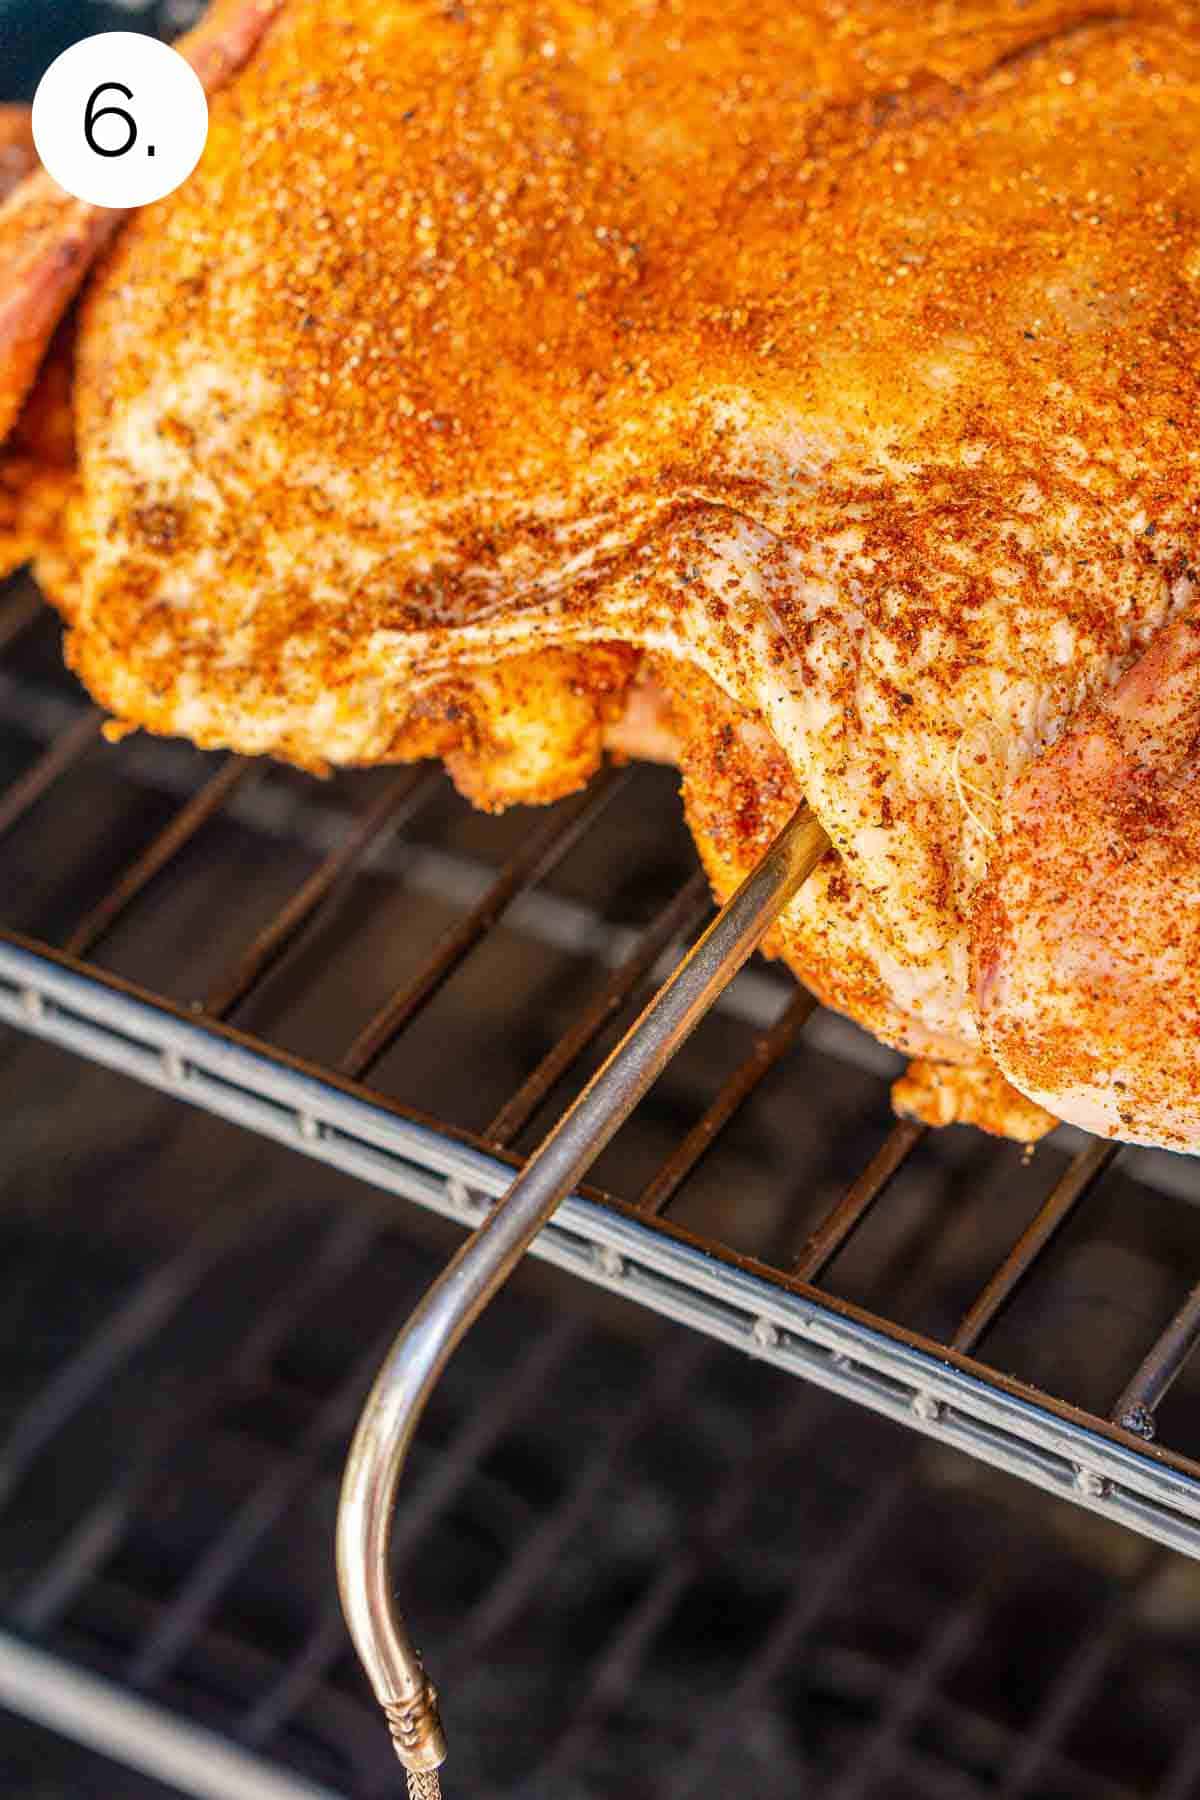 The chicken on the smoker grill grates with a leave-in meat thermometer inserted into the breast meat.